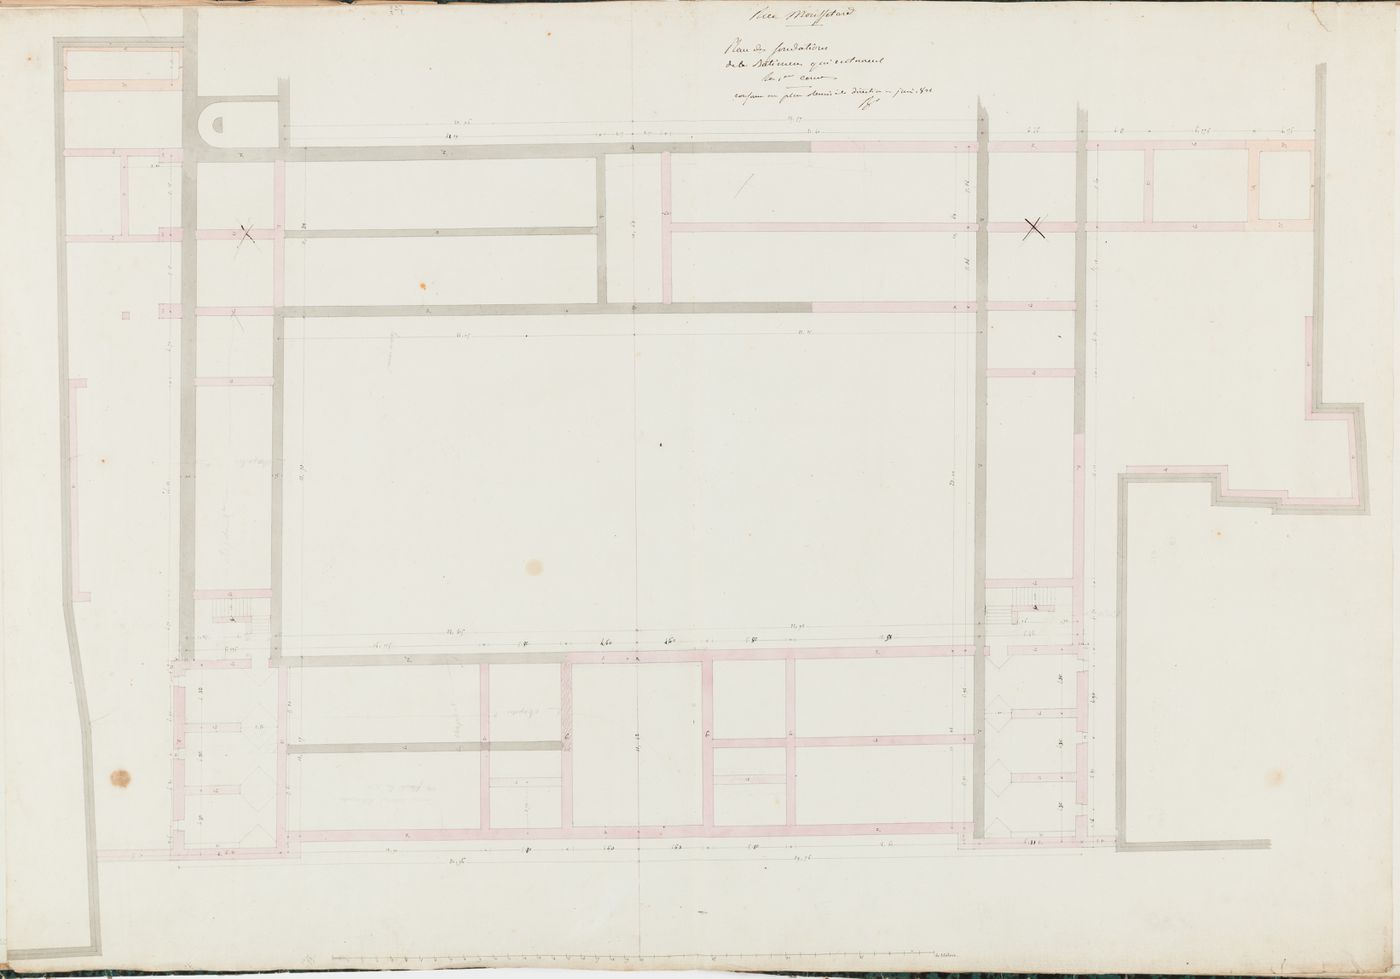 Project for the caserne de la Gendarmerie royale, rue Mouffetard: Foundation plans for the buildings surrounding the first courtyard